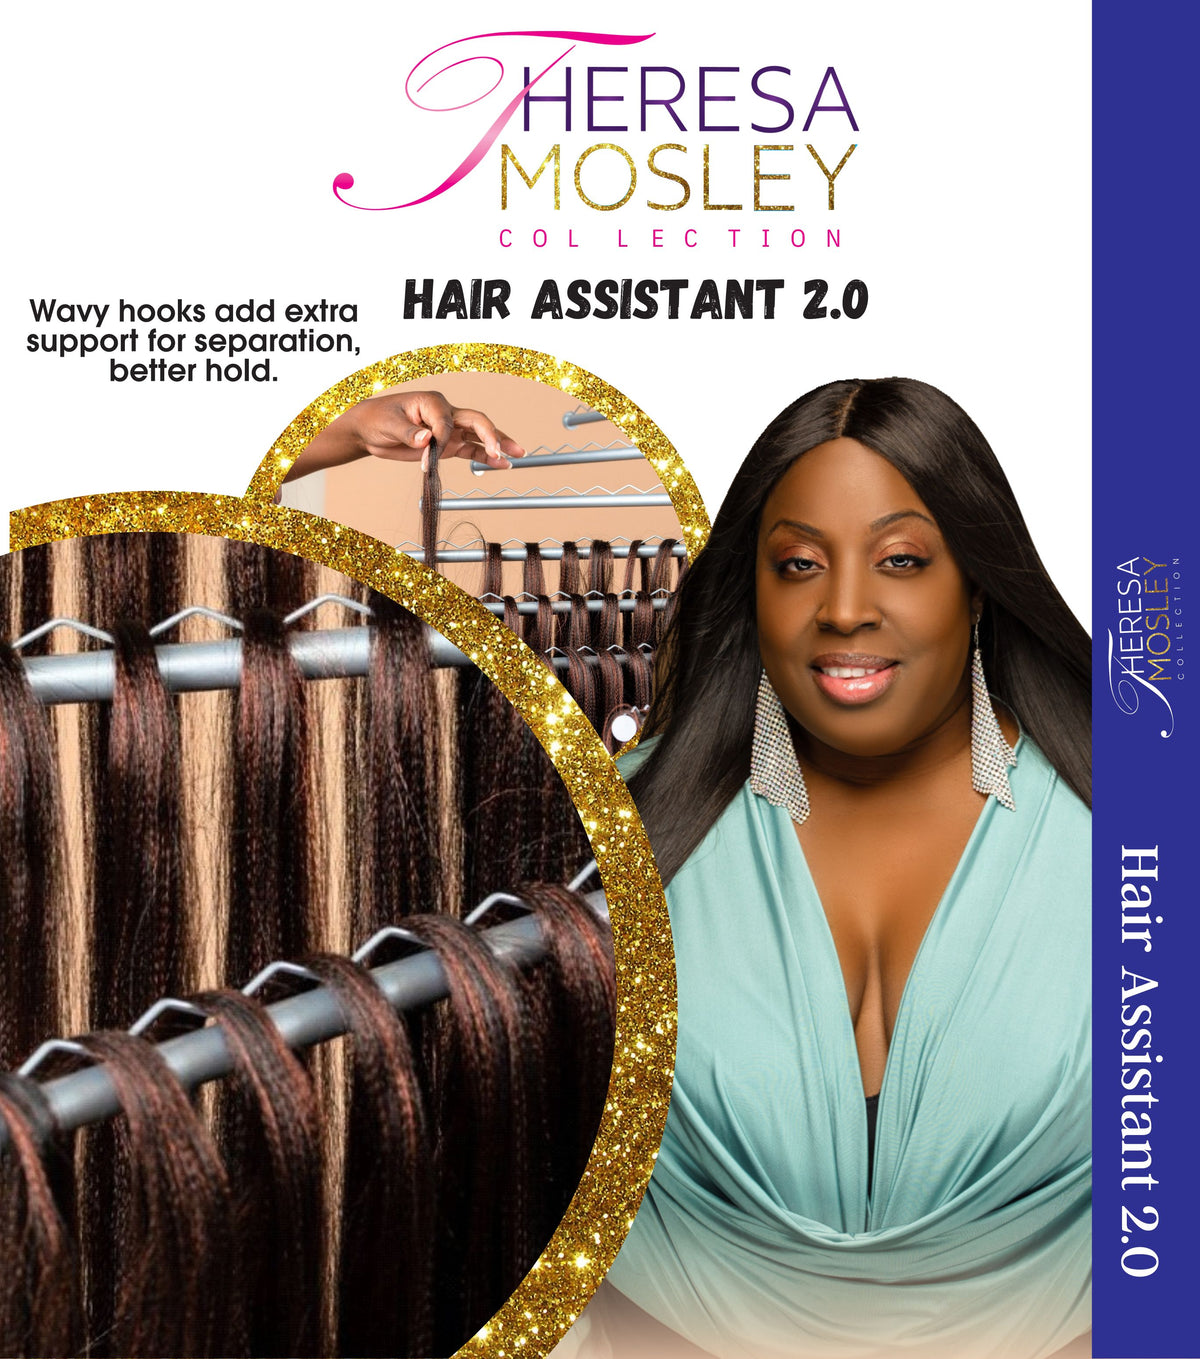  Theresa Mosley Collection Free Standing Hair Assistant